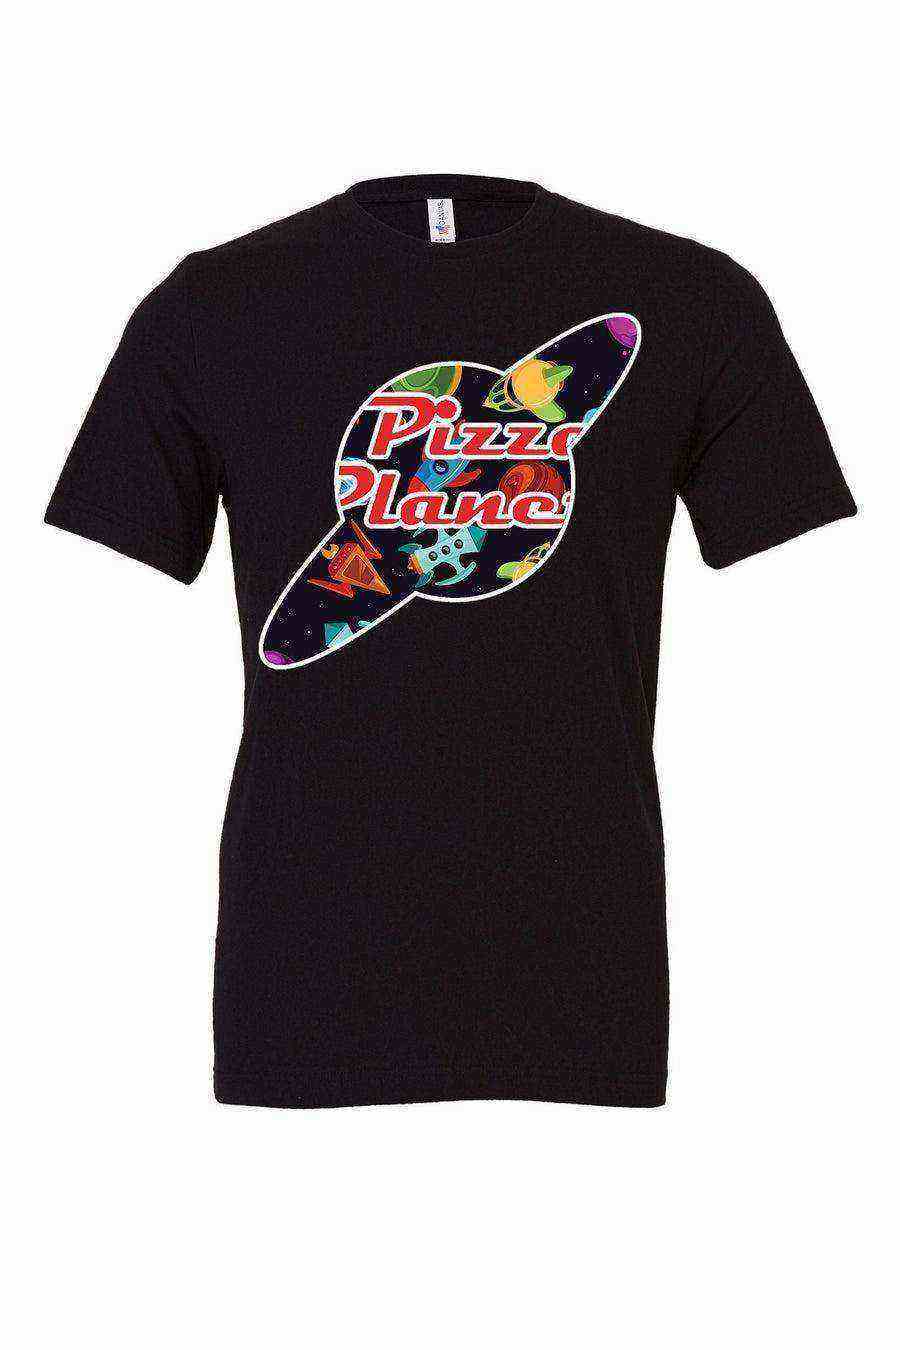 Youth | Graffiti Pizza Planet Tee | Toy Story Shirt | Pizza Planet Party Shirt - Dylan's Tees